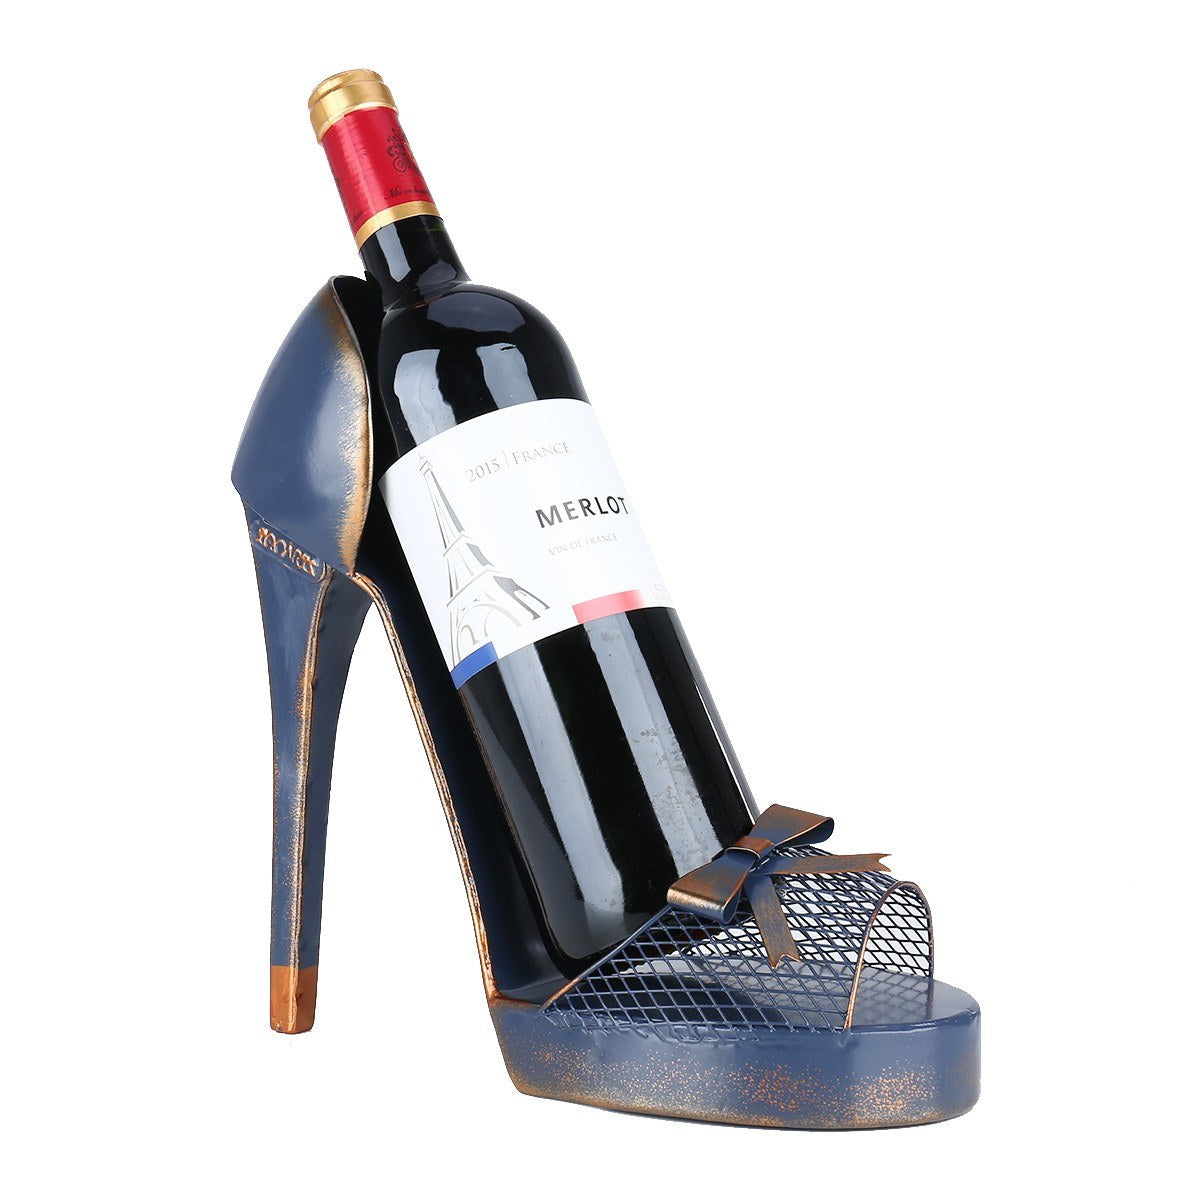 Funny single wine bottle holder, It's never been easier to organize your wine